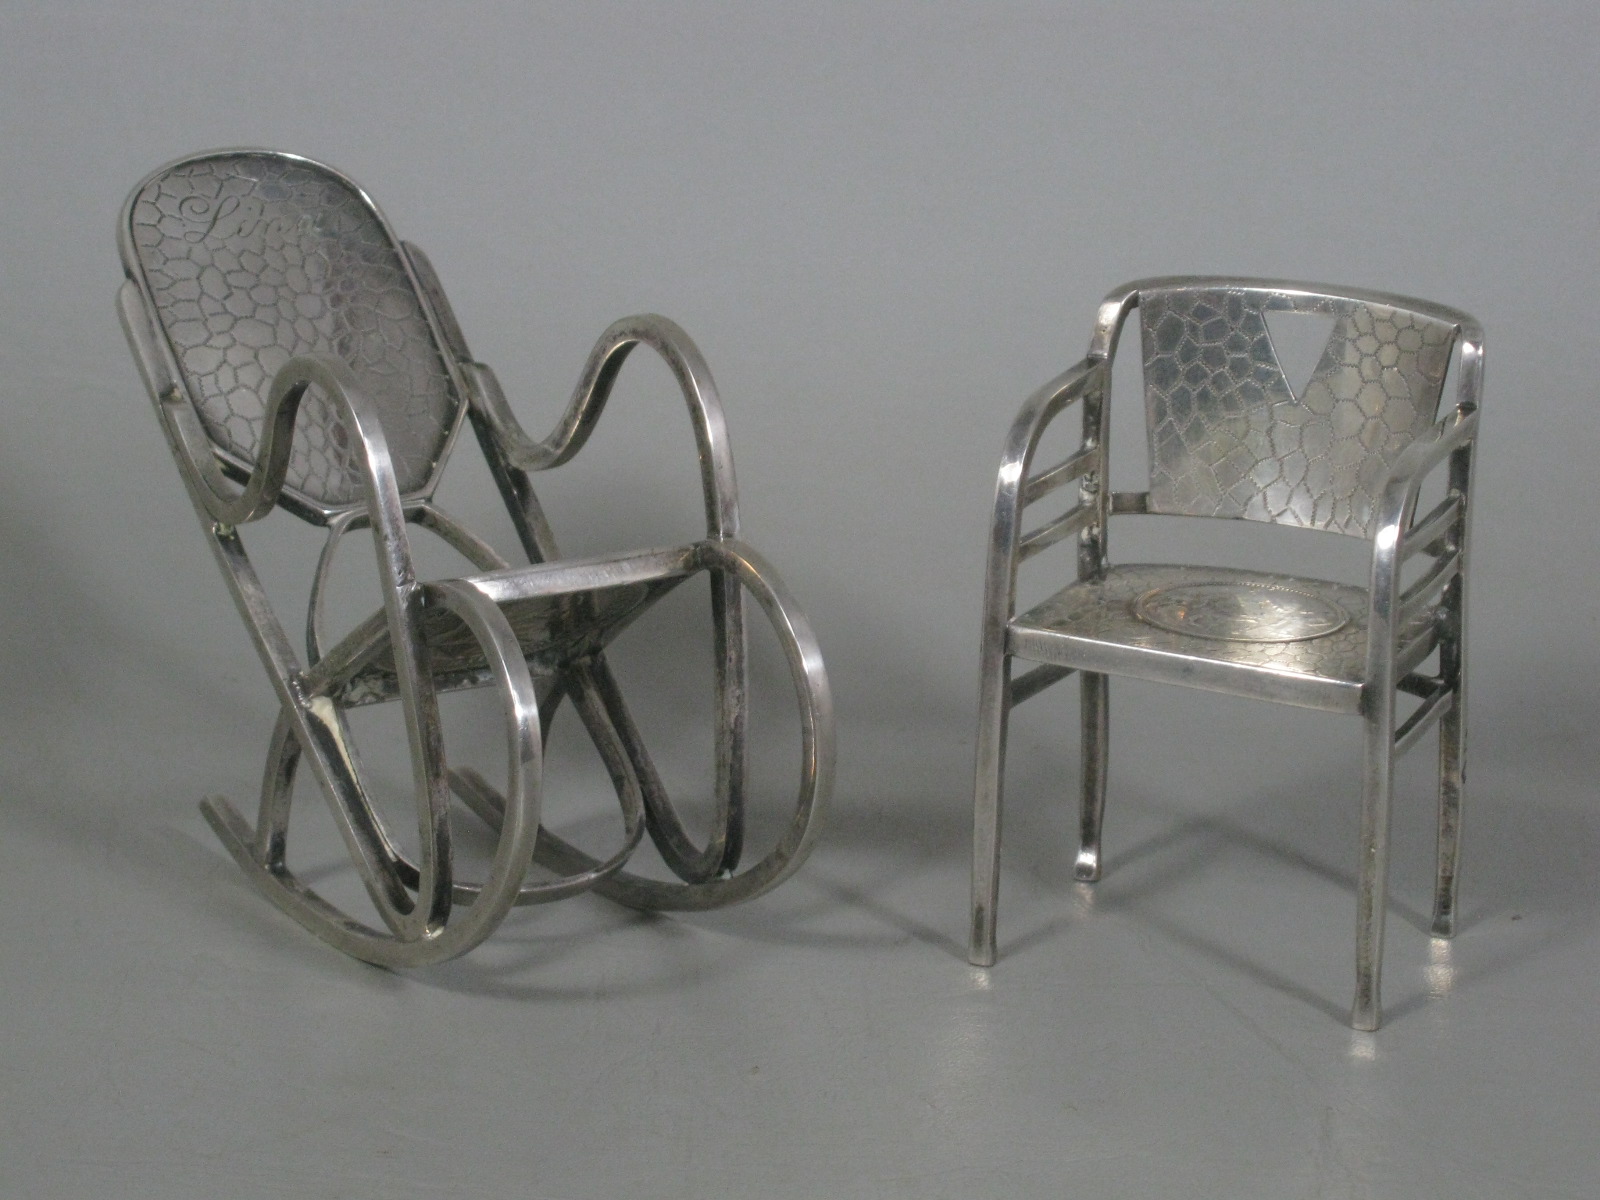 2 Vtg Antique Sterling? Silver Miniature Coin Chairs 1893 1/2 Dollar 1896 Korona